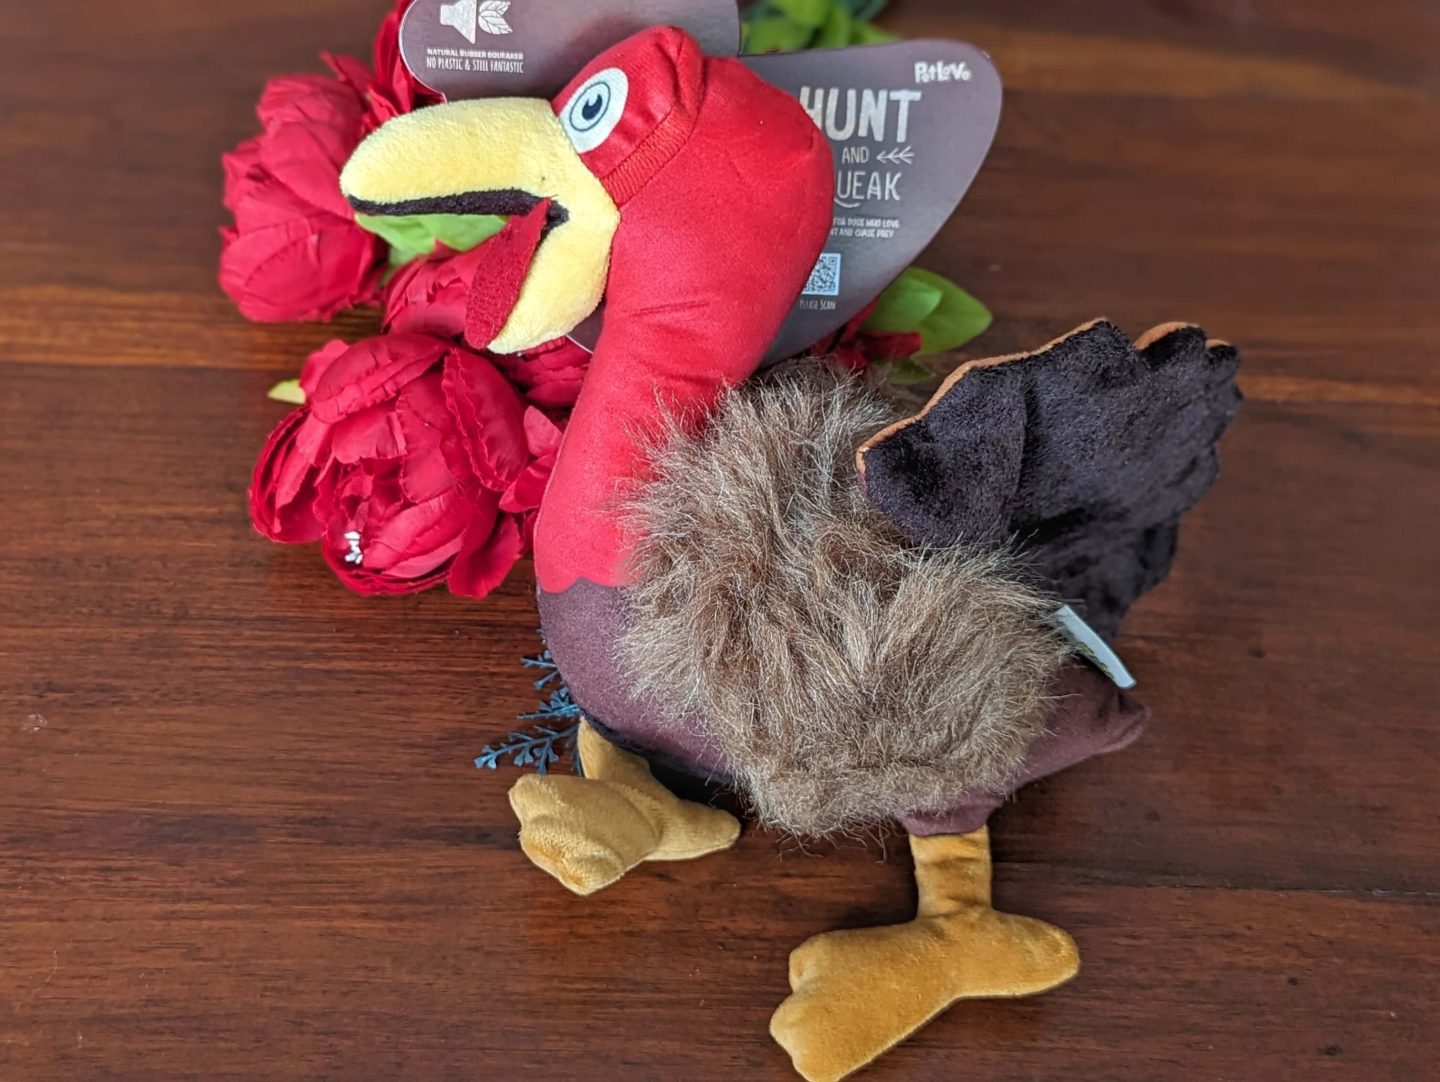 PetLove Hunt n Squeak Wild Turkey toy displayed against a wooden background with red flowers under the turkey's head - part of the pet section of the four gift rule Christmas gift guide